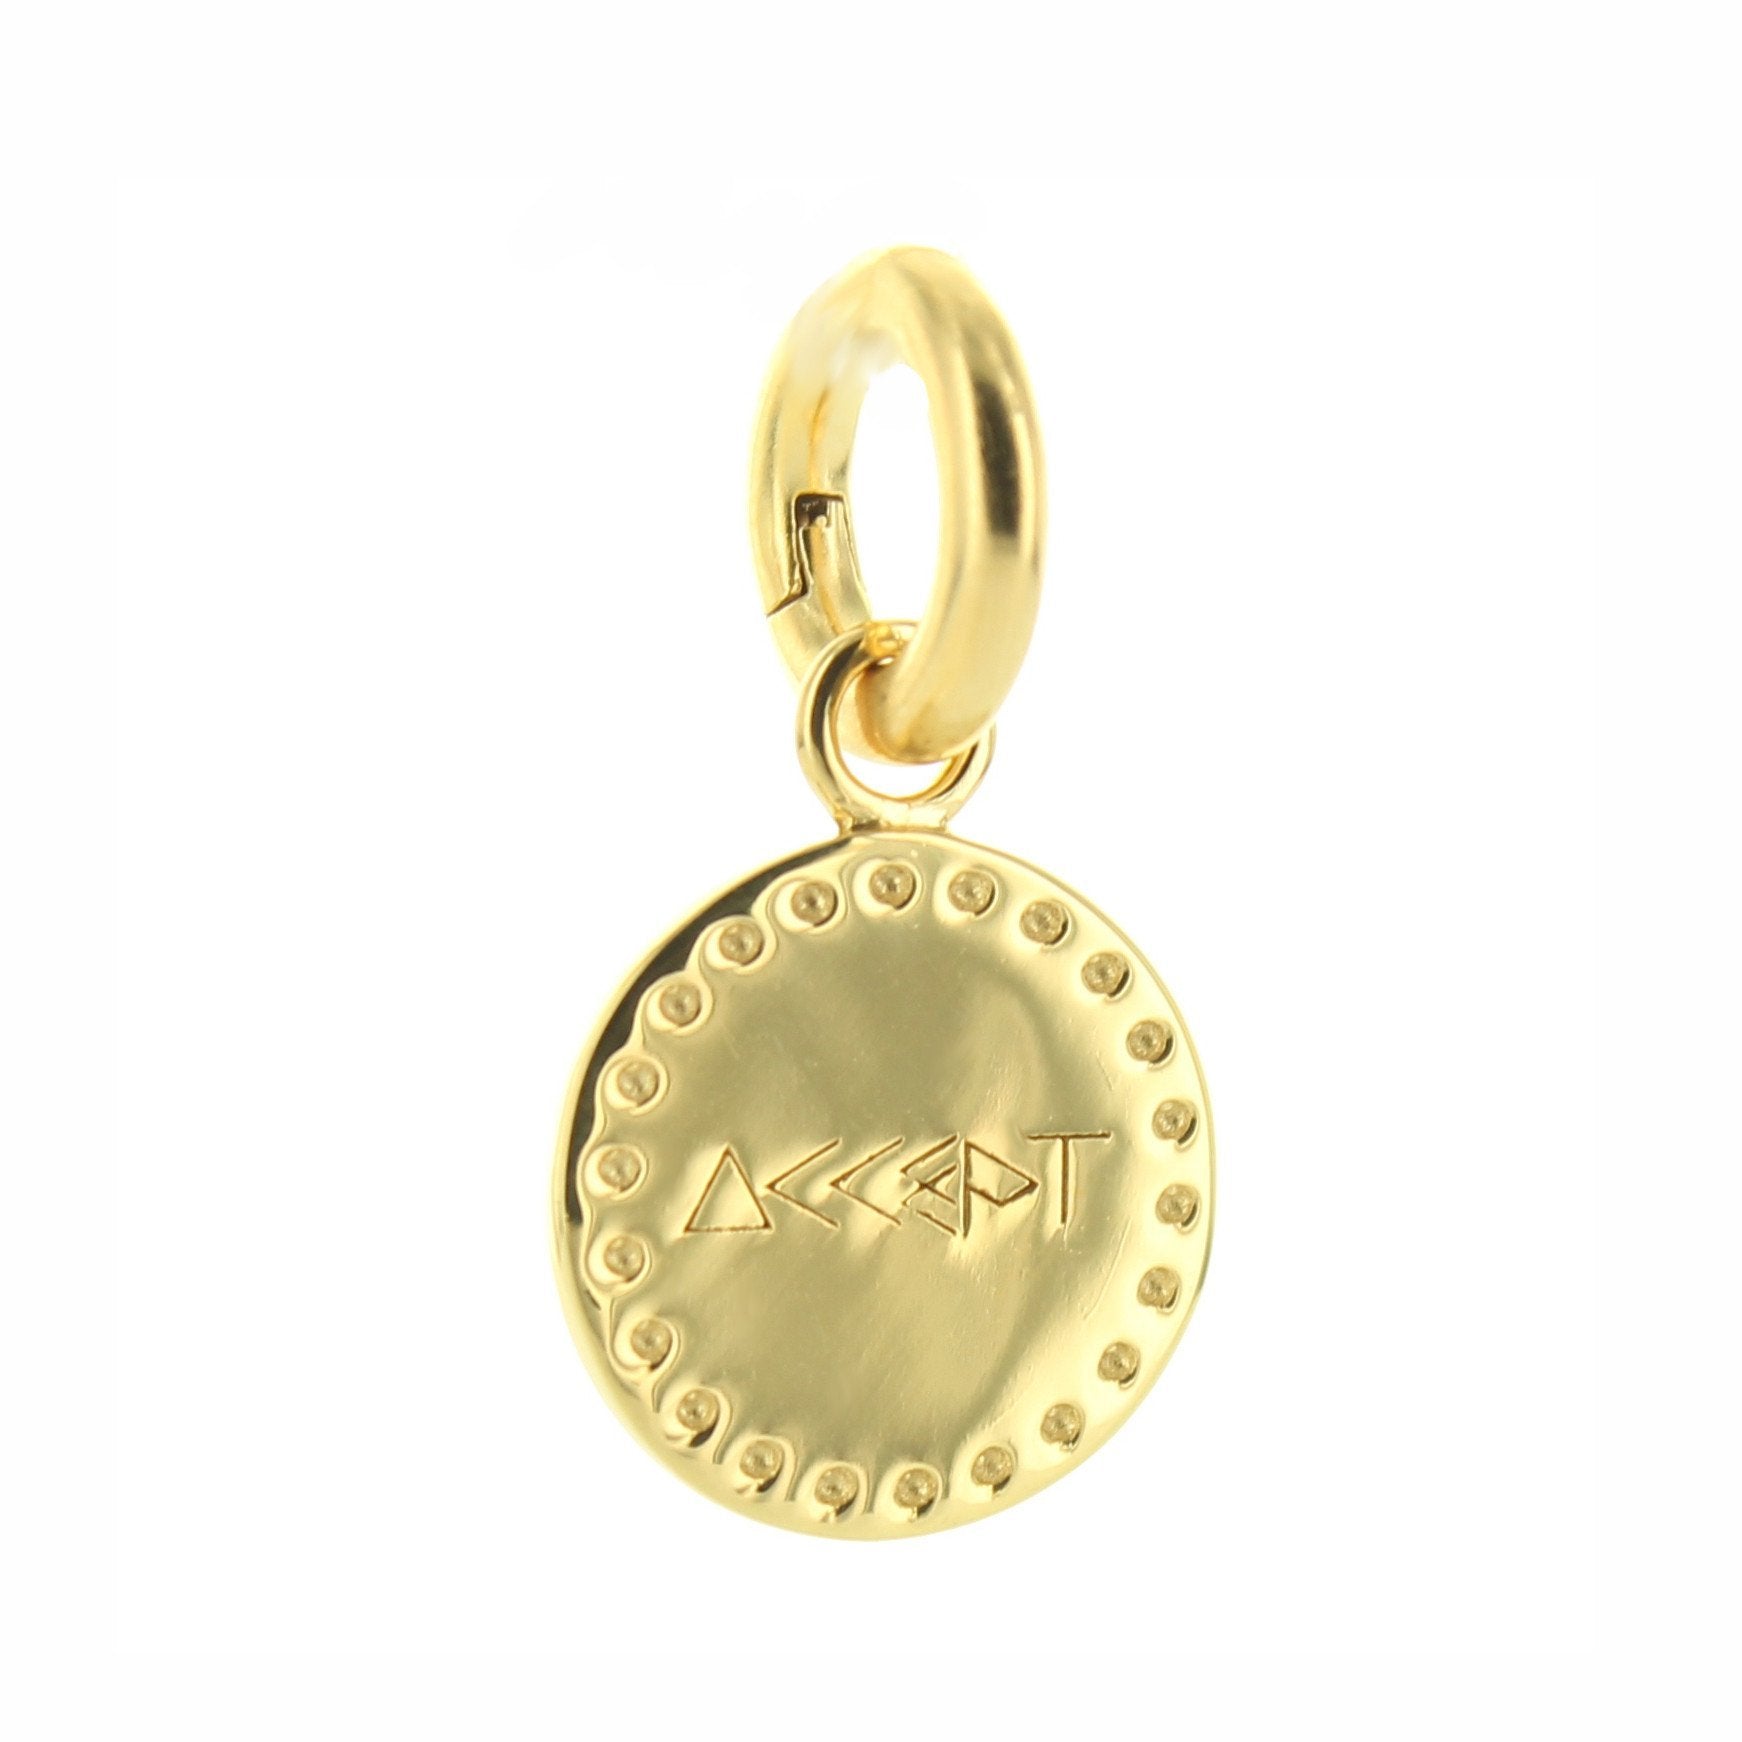 ACCEPT FLOATING CHARM PENDANT ALL METAL GOLD - SO PRETTY CARA COTTER